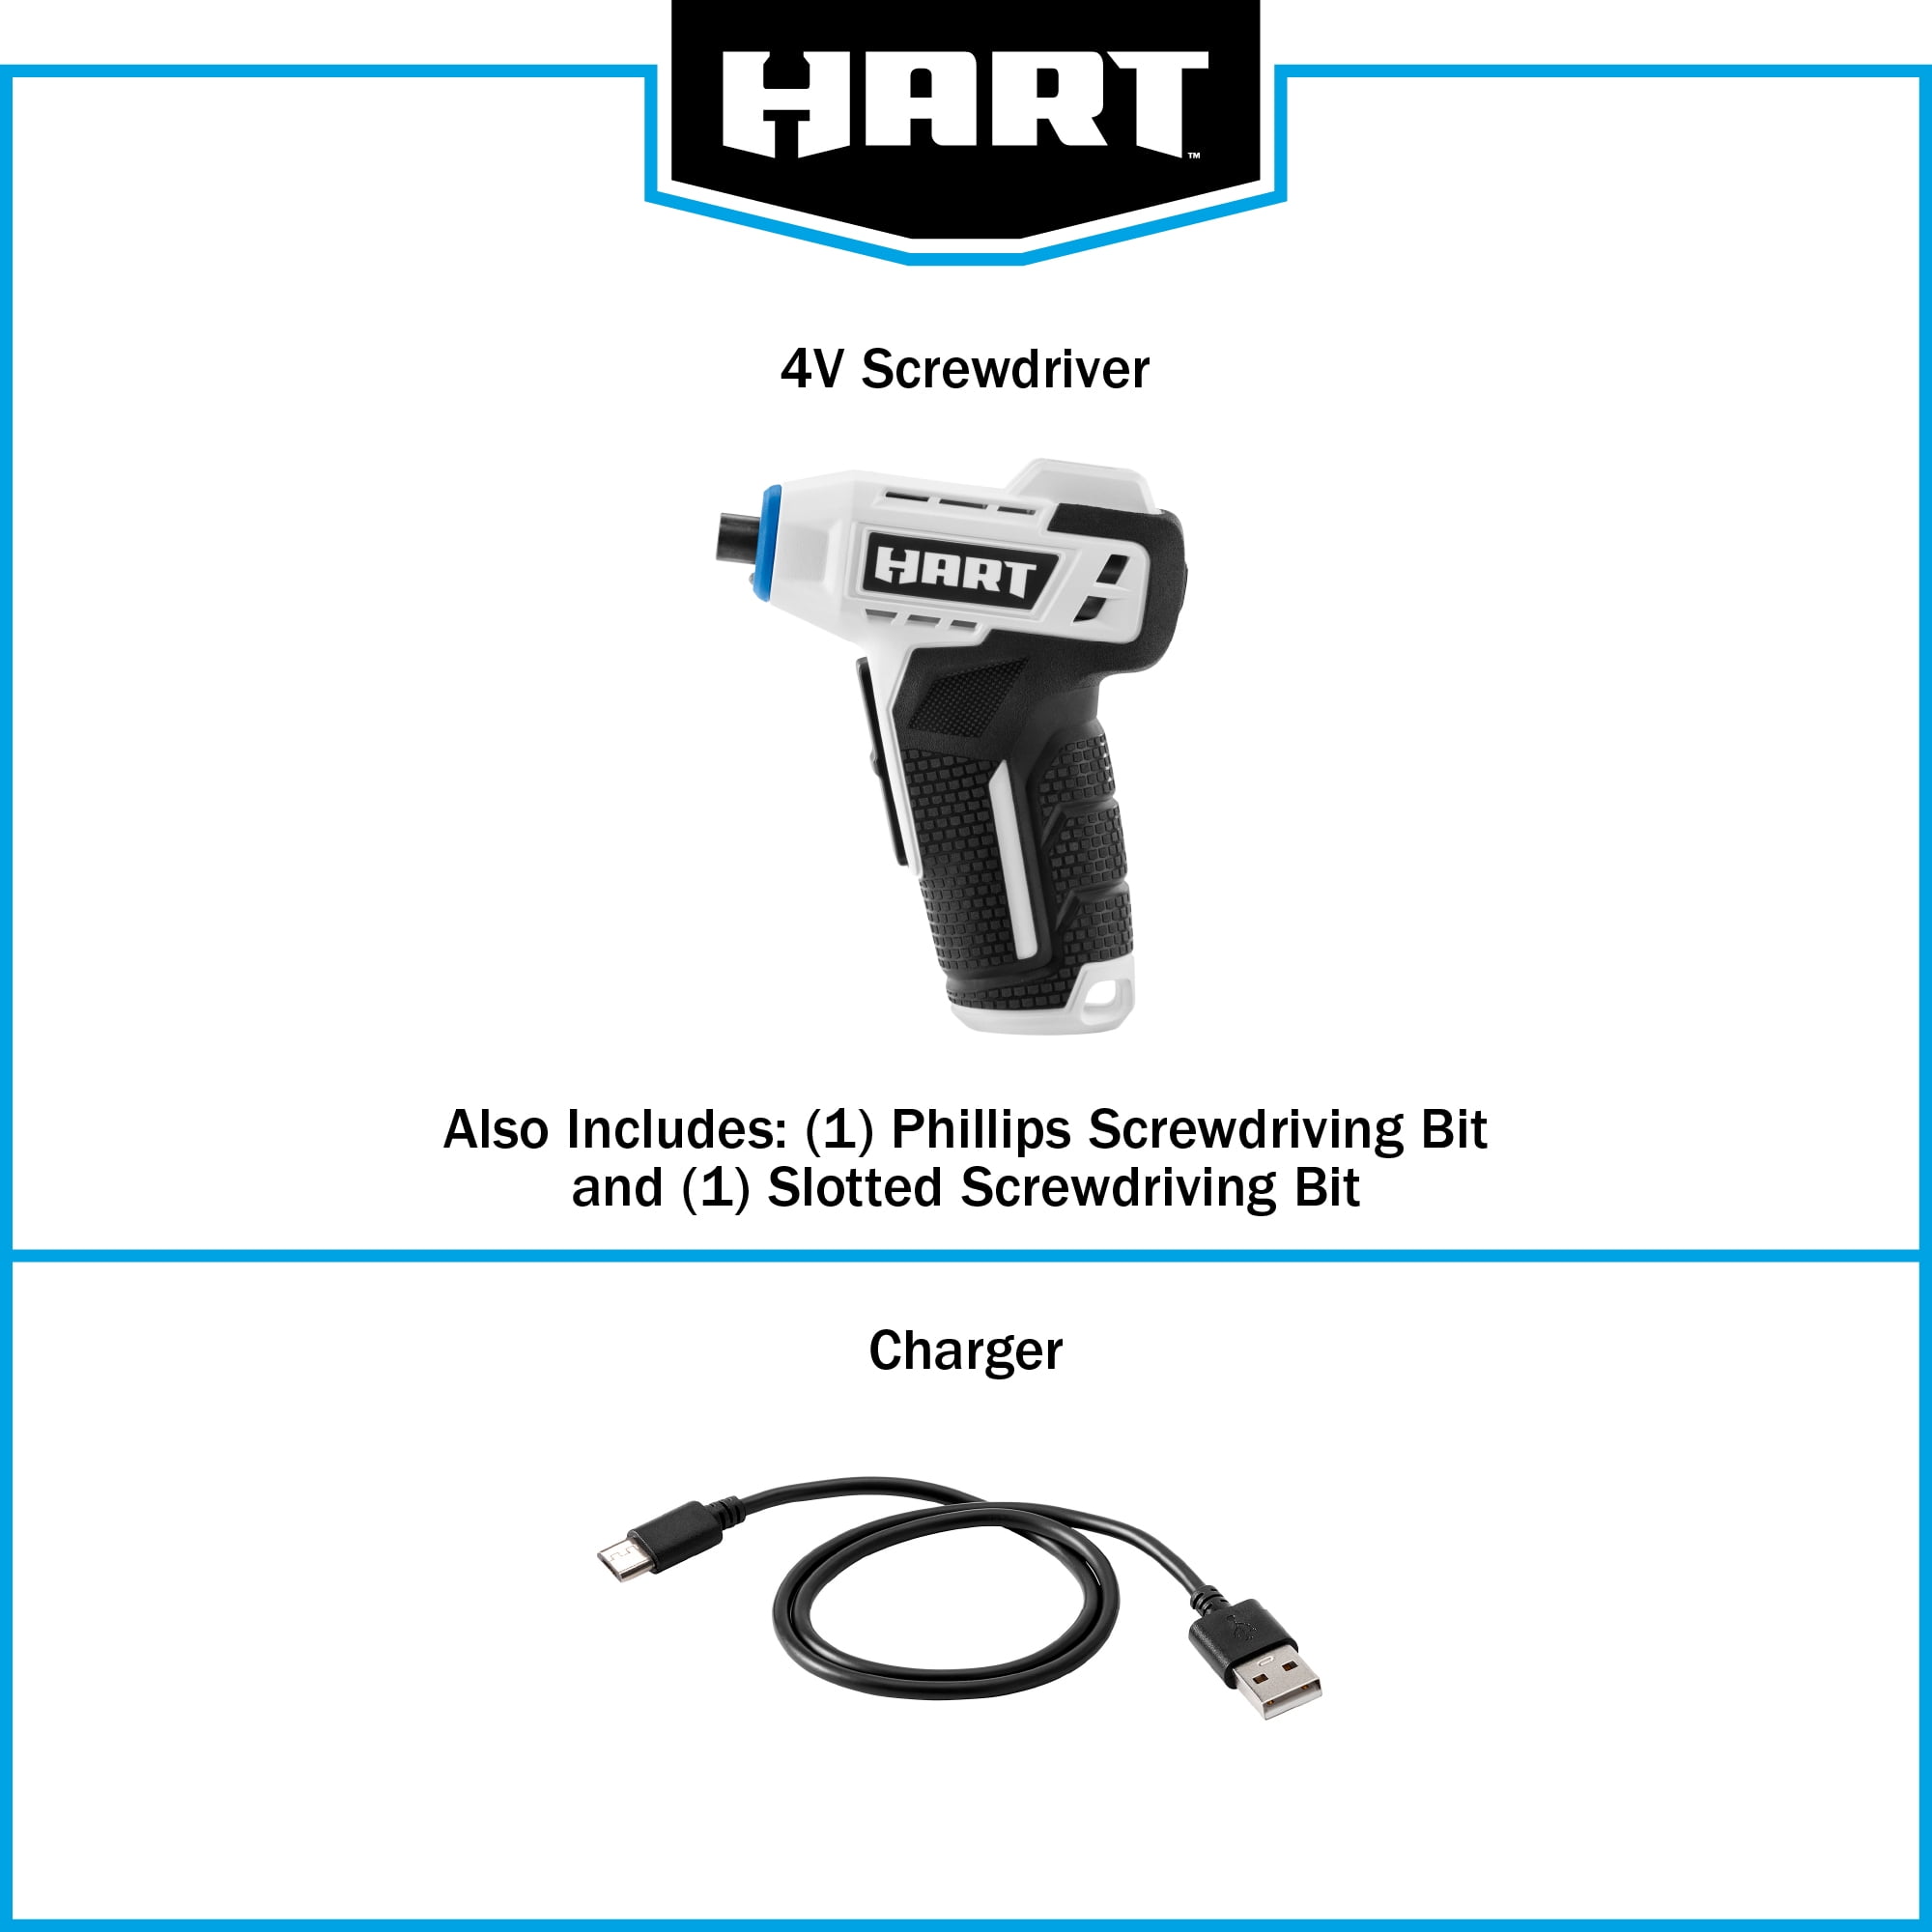 HART 4-Volt Rechargeable Screwdriver with Philips and Slotted Bit